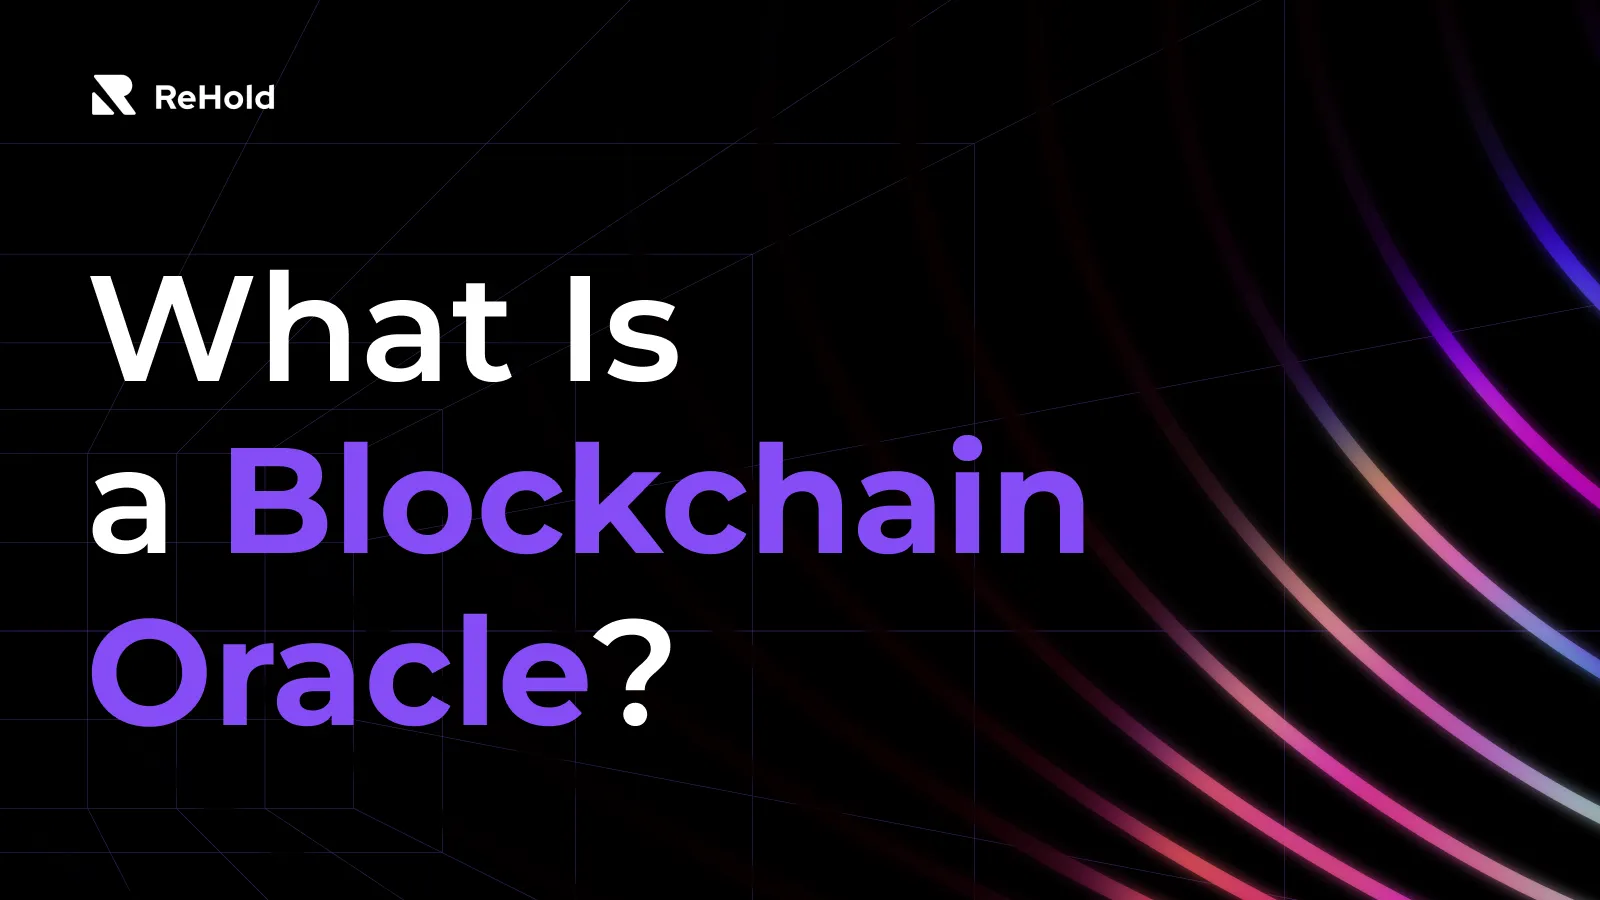 What Is a Blockchain Oracle